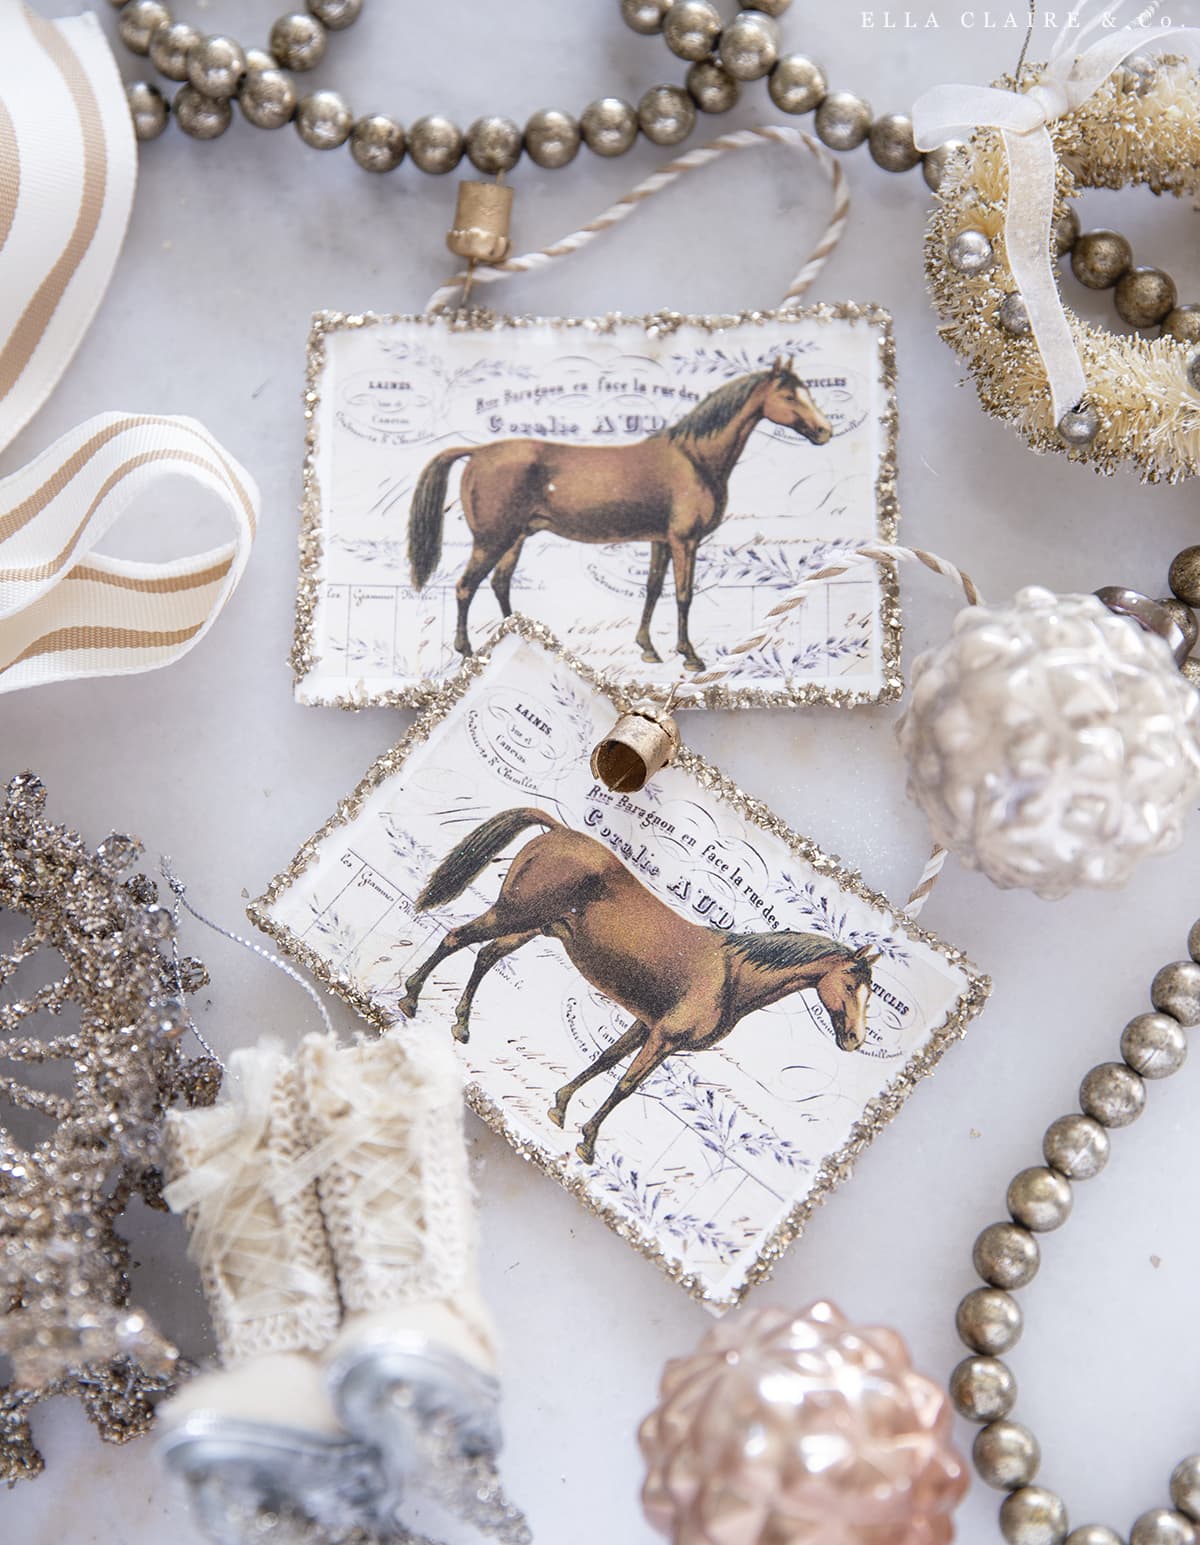 Free printable ornaments with vintage horses and glass glitter